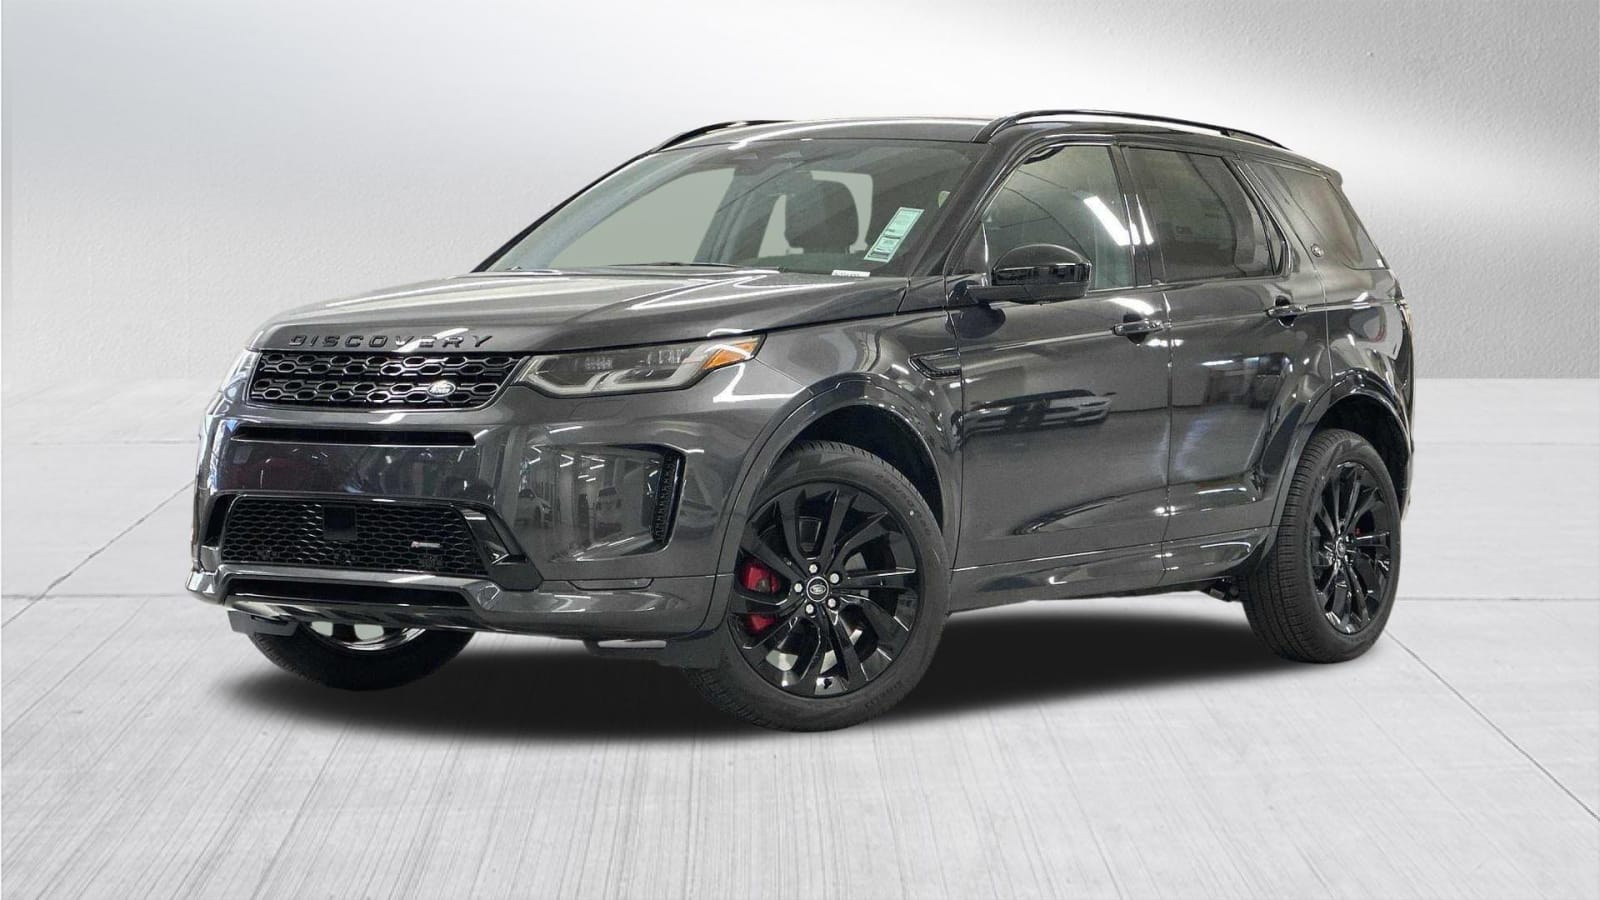 2023 Land Rover Discovery vs. Discovery Sport